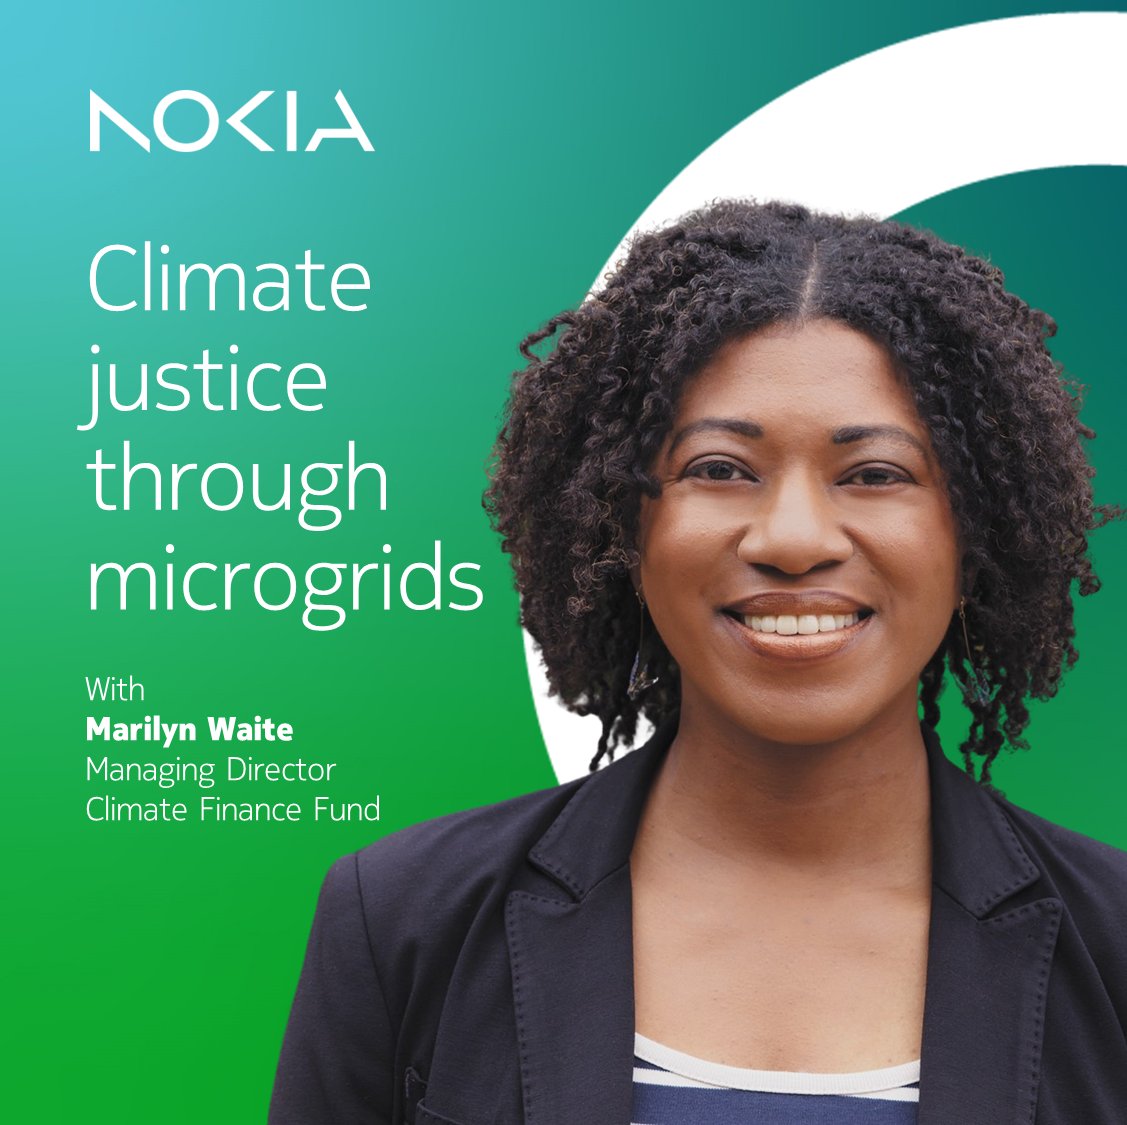 How do communities burdened by the cost of energy lift themselves out of poverty while reducing their carbon footprint? For The Climate Finance Fund’s Marilyn Waite, #microgridtechnology is a solution. #climatechange

Listen to the full #podcast nokia.ly/43i623O